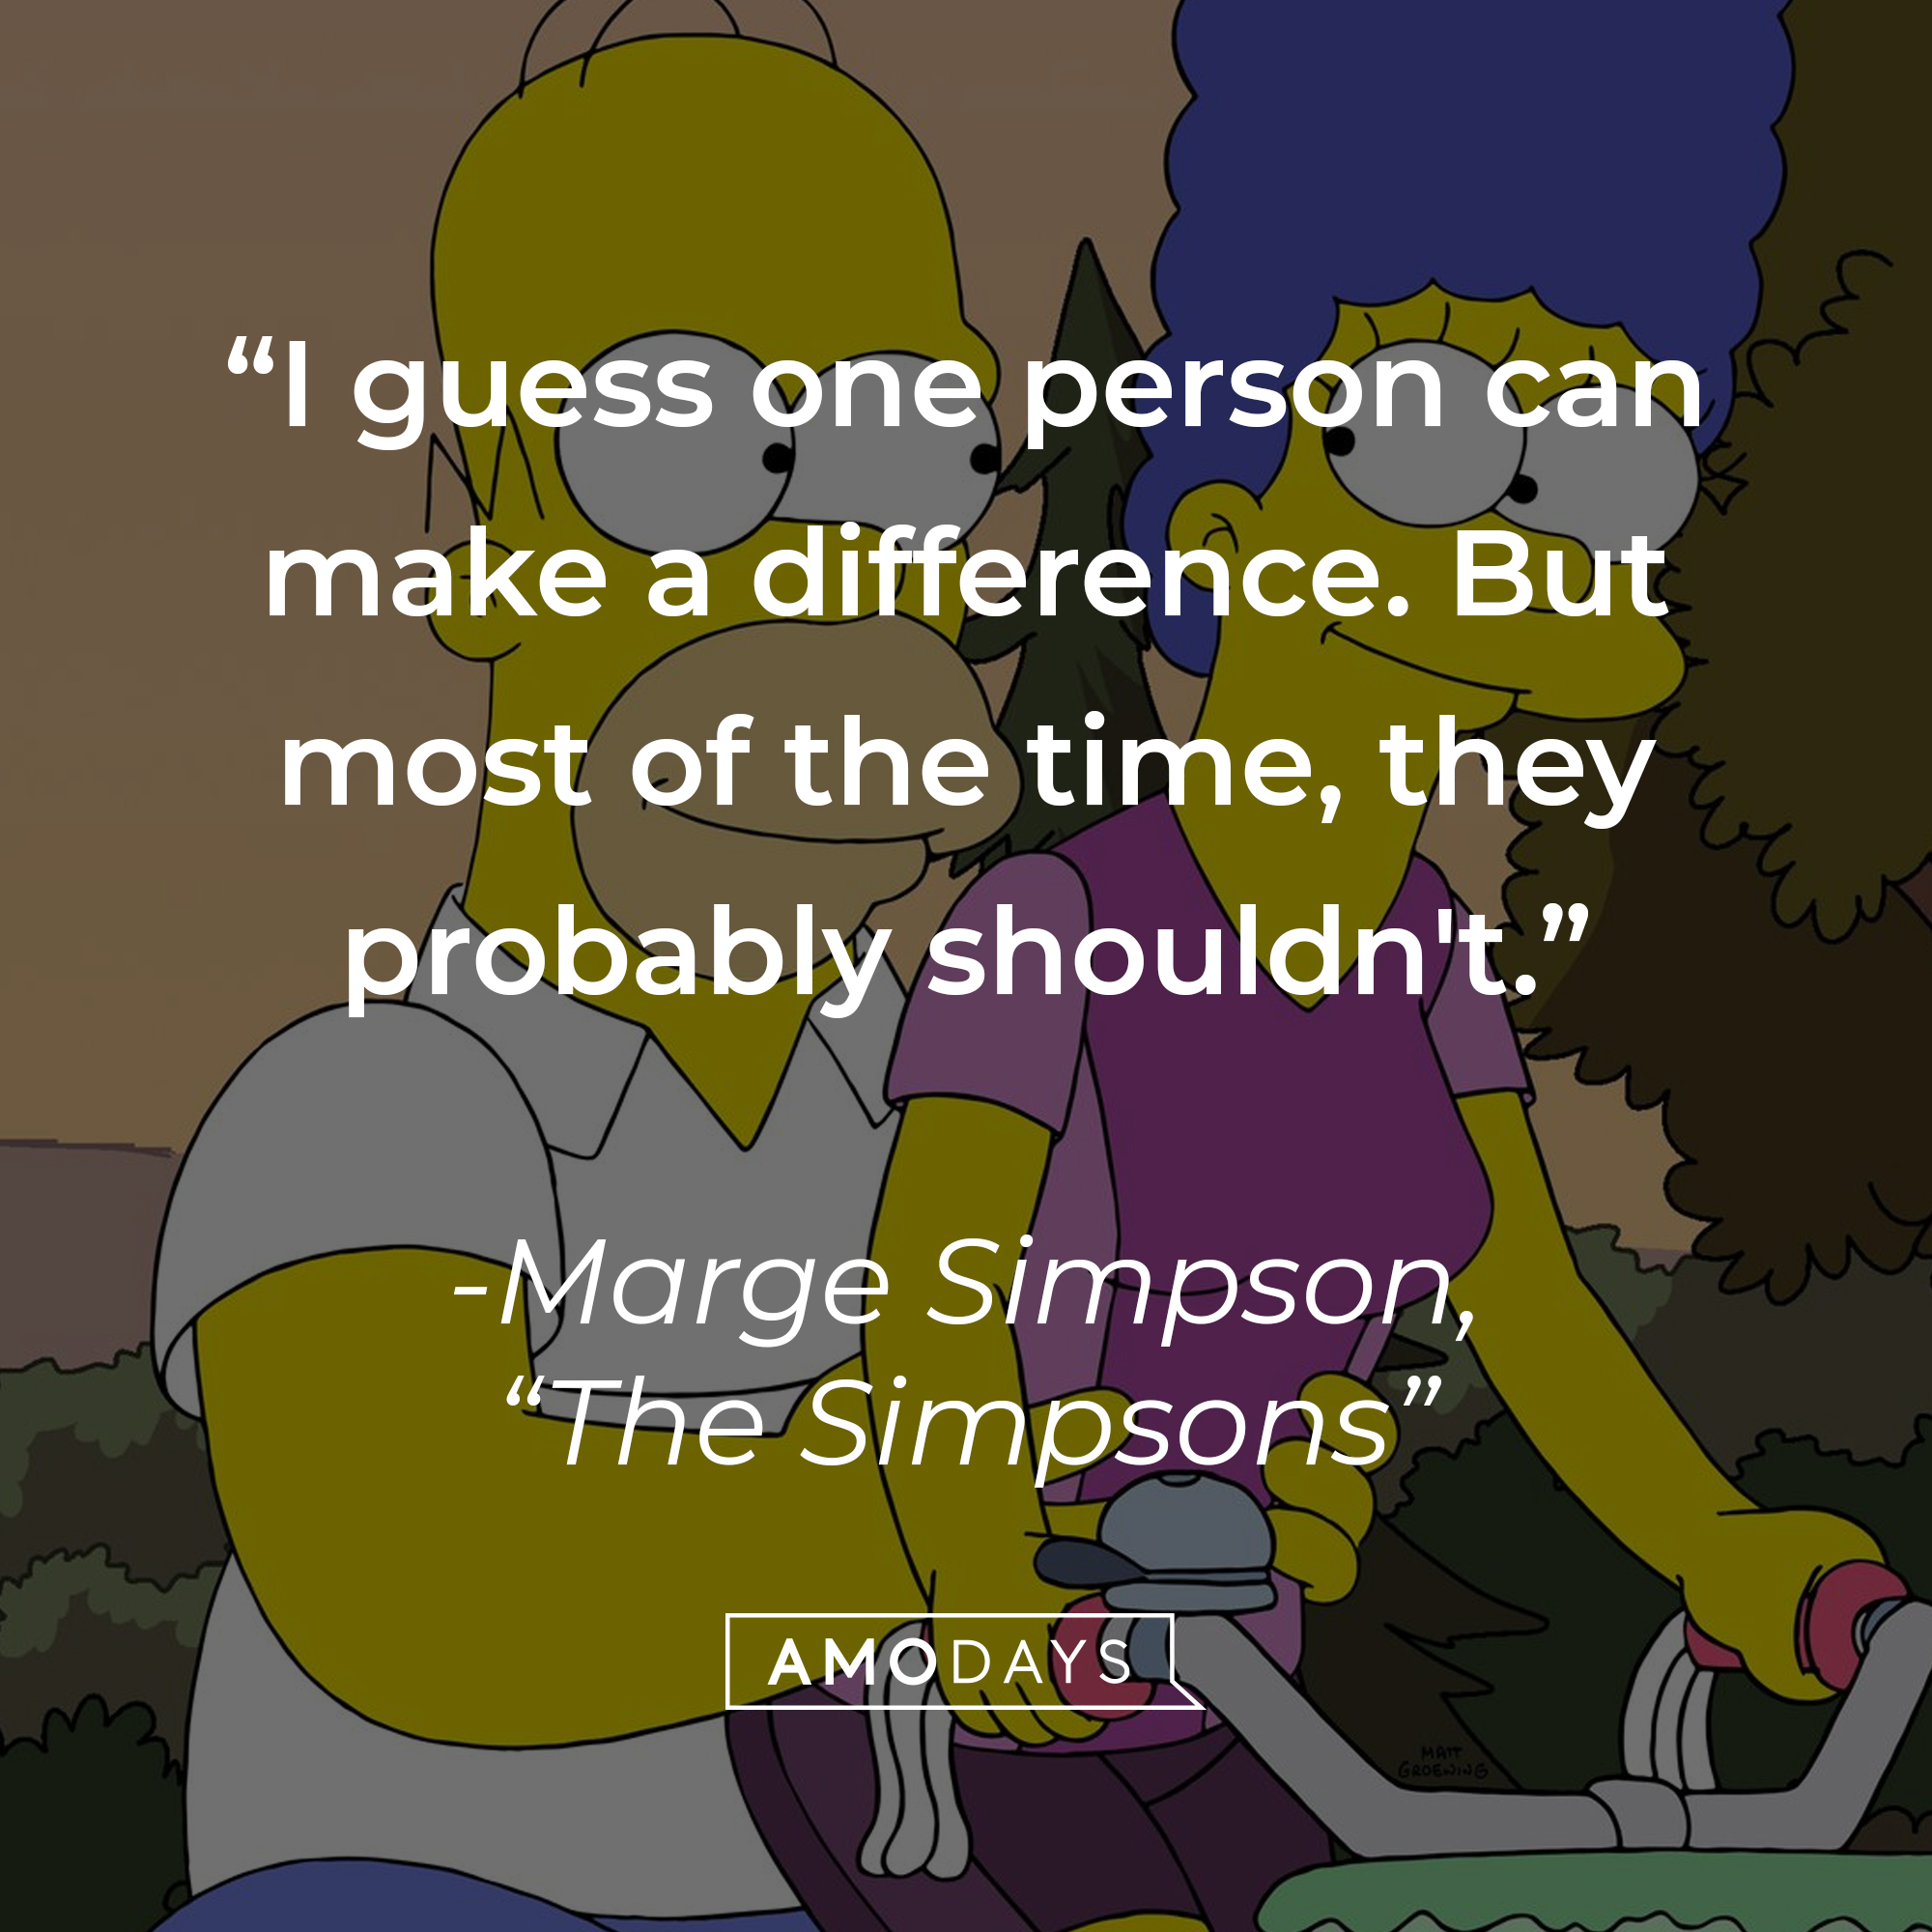 Marge Simpson's quote: "I guess one person can make a difference. But most of the time, they probably shouldn't." | Image: facebook.com/TheSimpsons